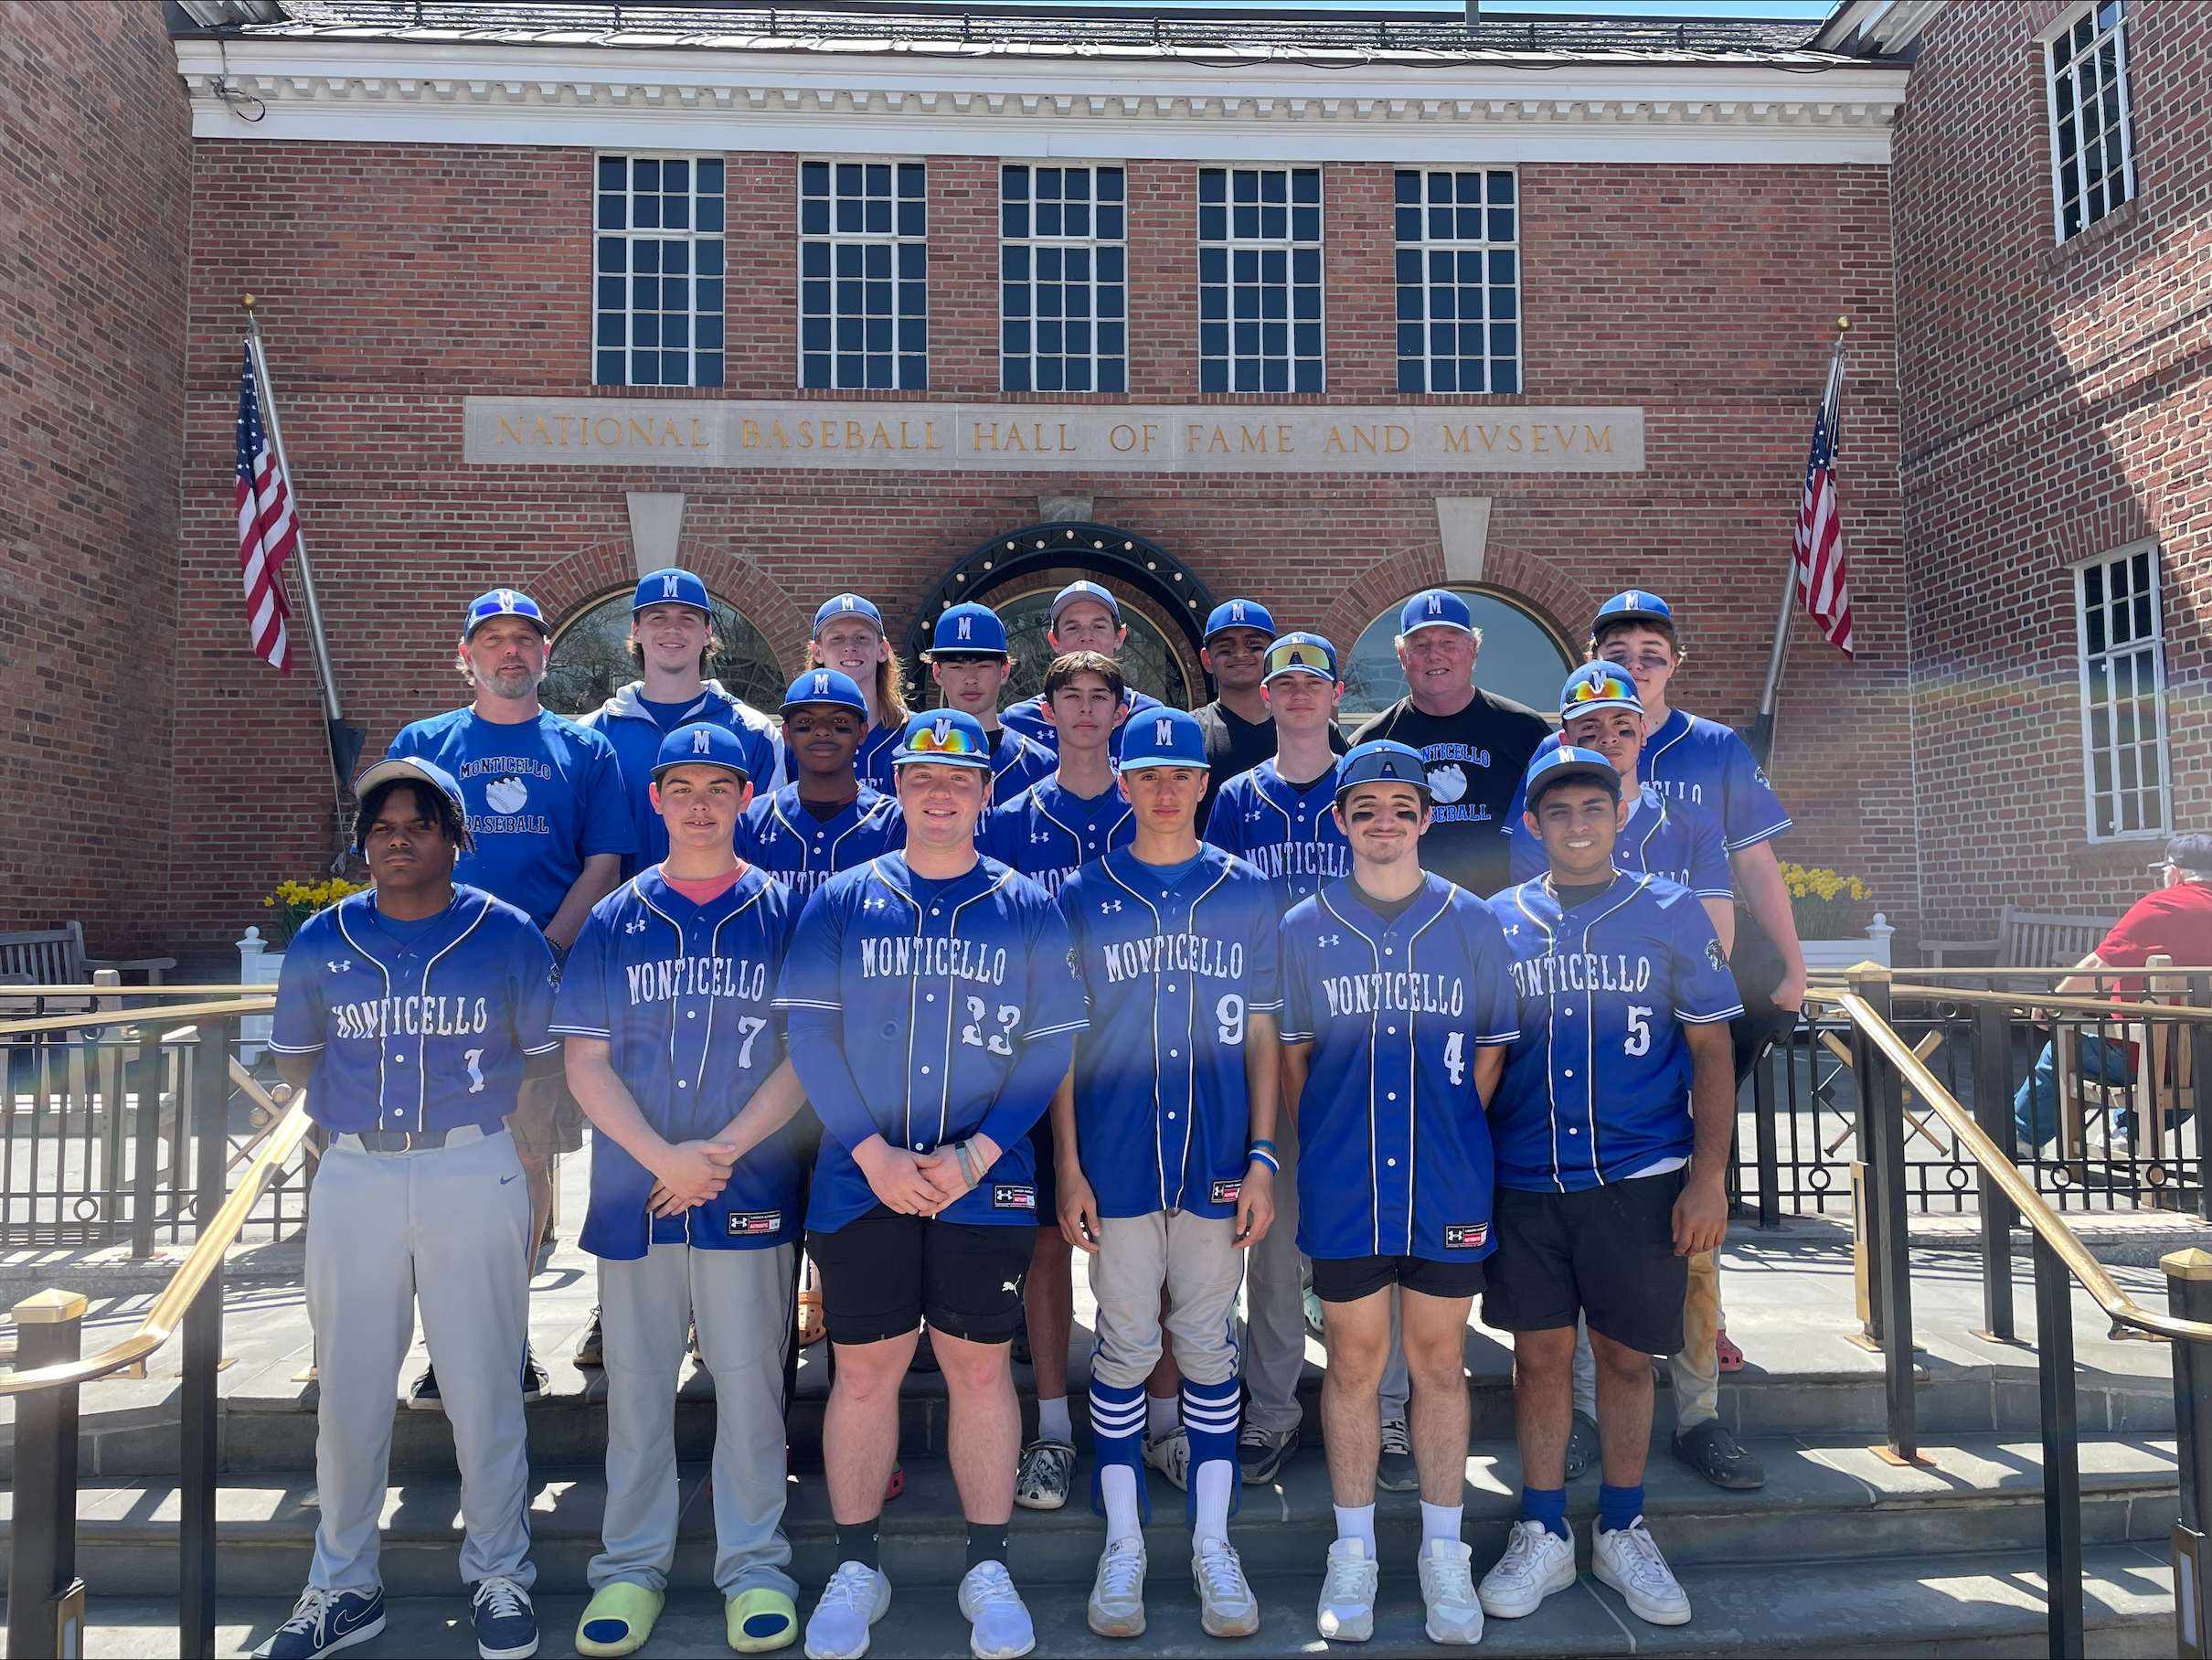 the baseball team poses on the steps of the hall of fame